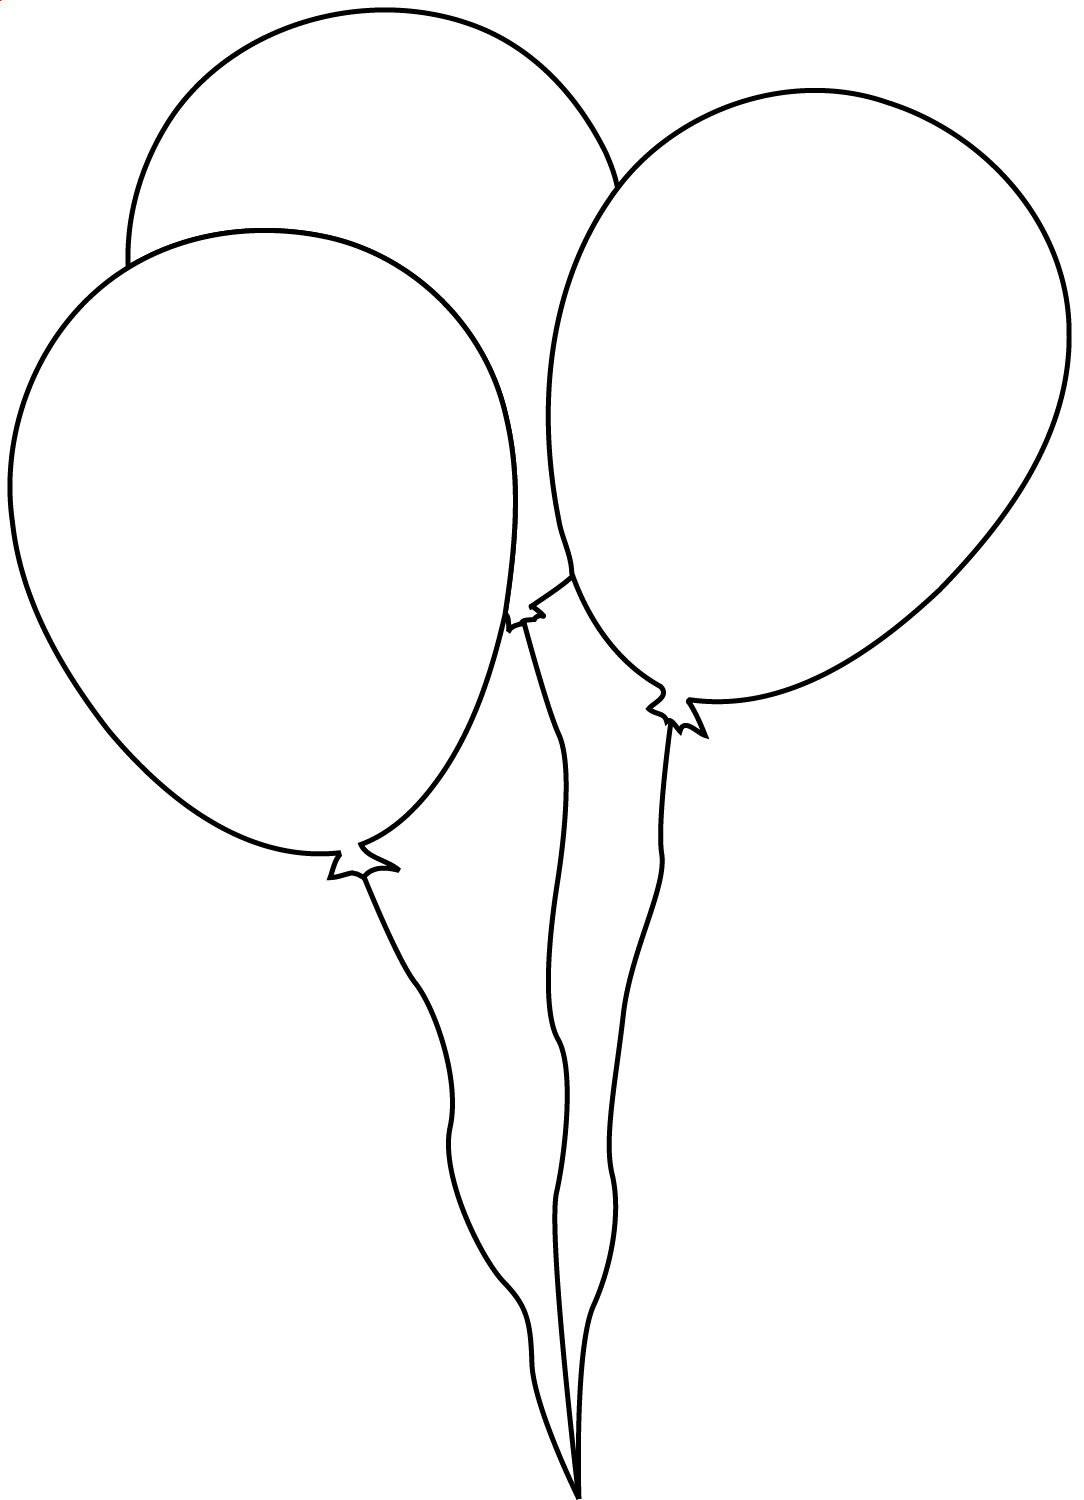 New Three Balloons Coloring Page Coloring Page